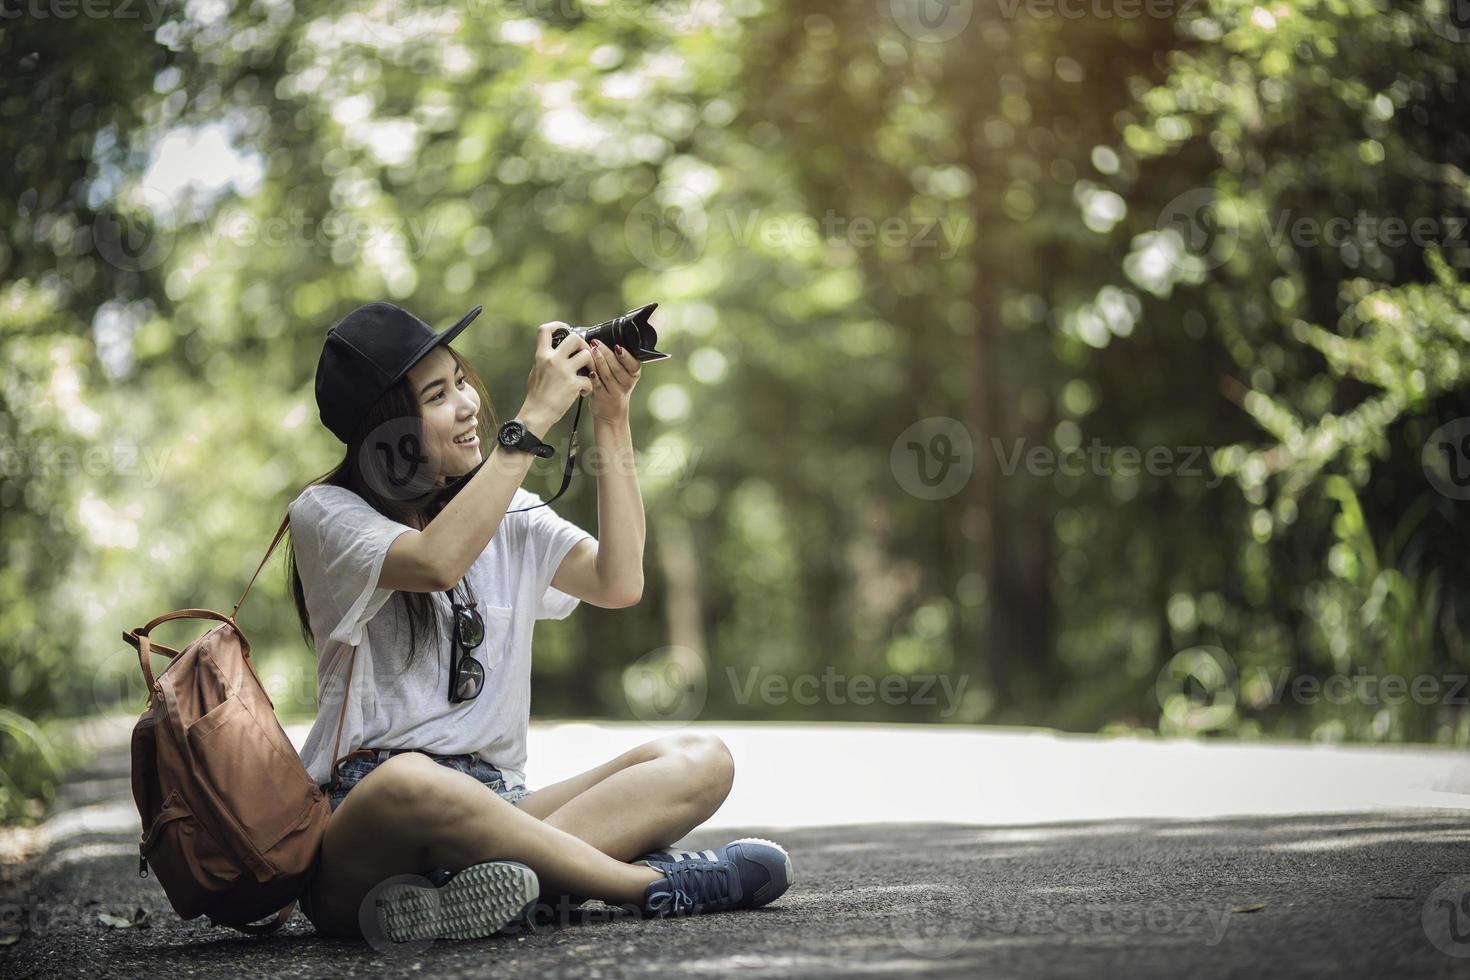 Outdoor summer smiling lifestyle portrait of pretty young woman having fun with camera travel photo of photographer Making pictures